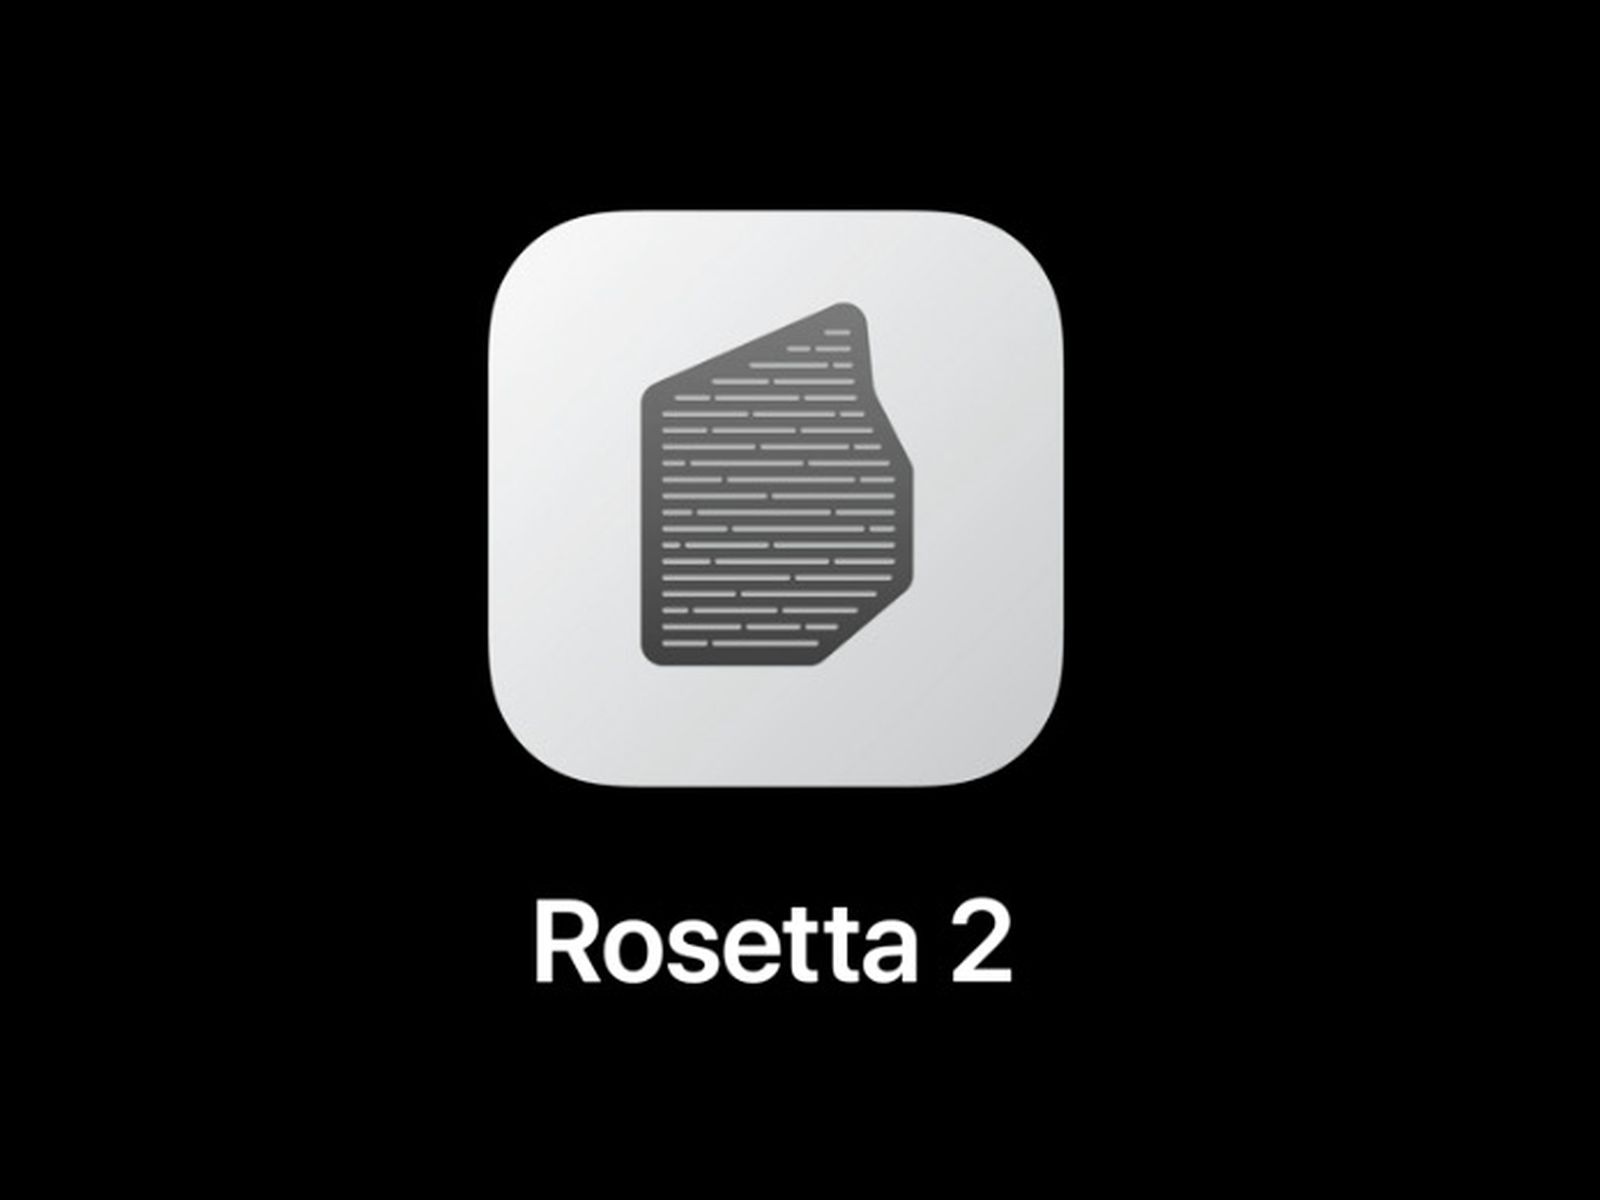 How to check if Rosetta 2 is installed on Mac